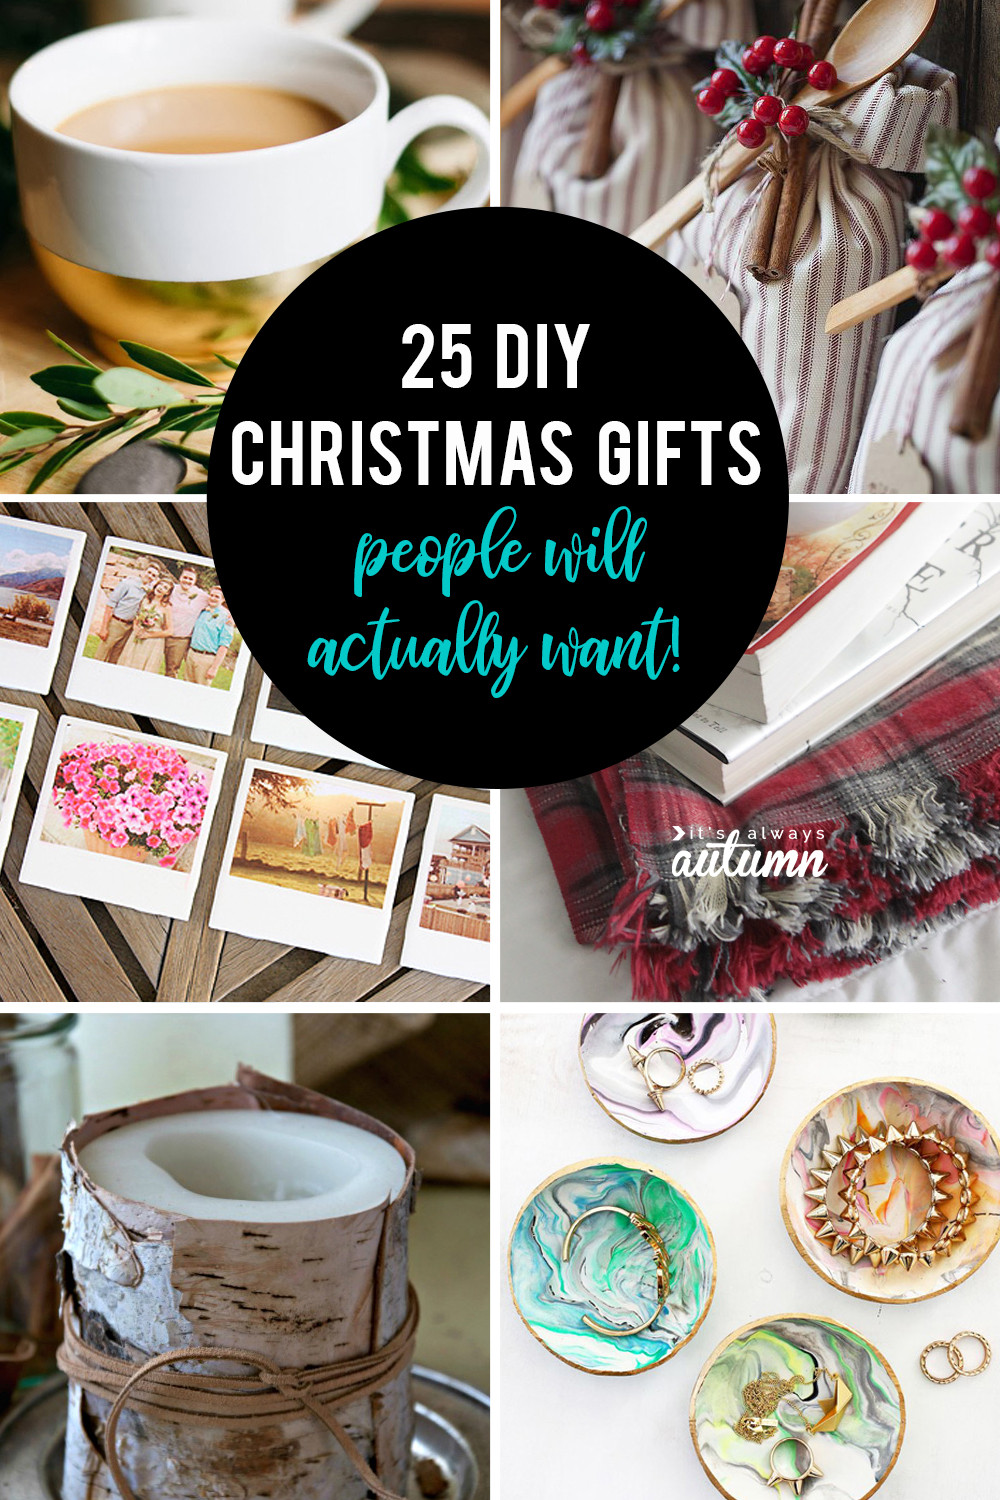 Cool DIY Christmas Gifts
 25 amazing DIY ts people will actually want It s